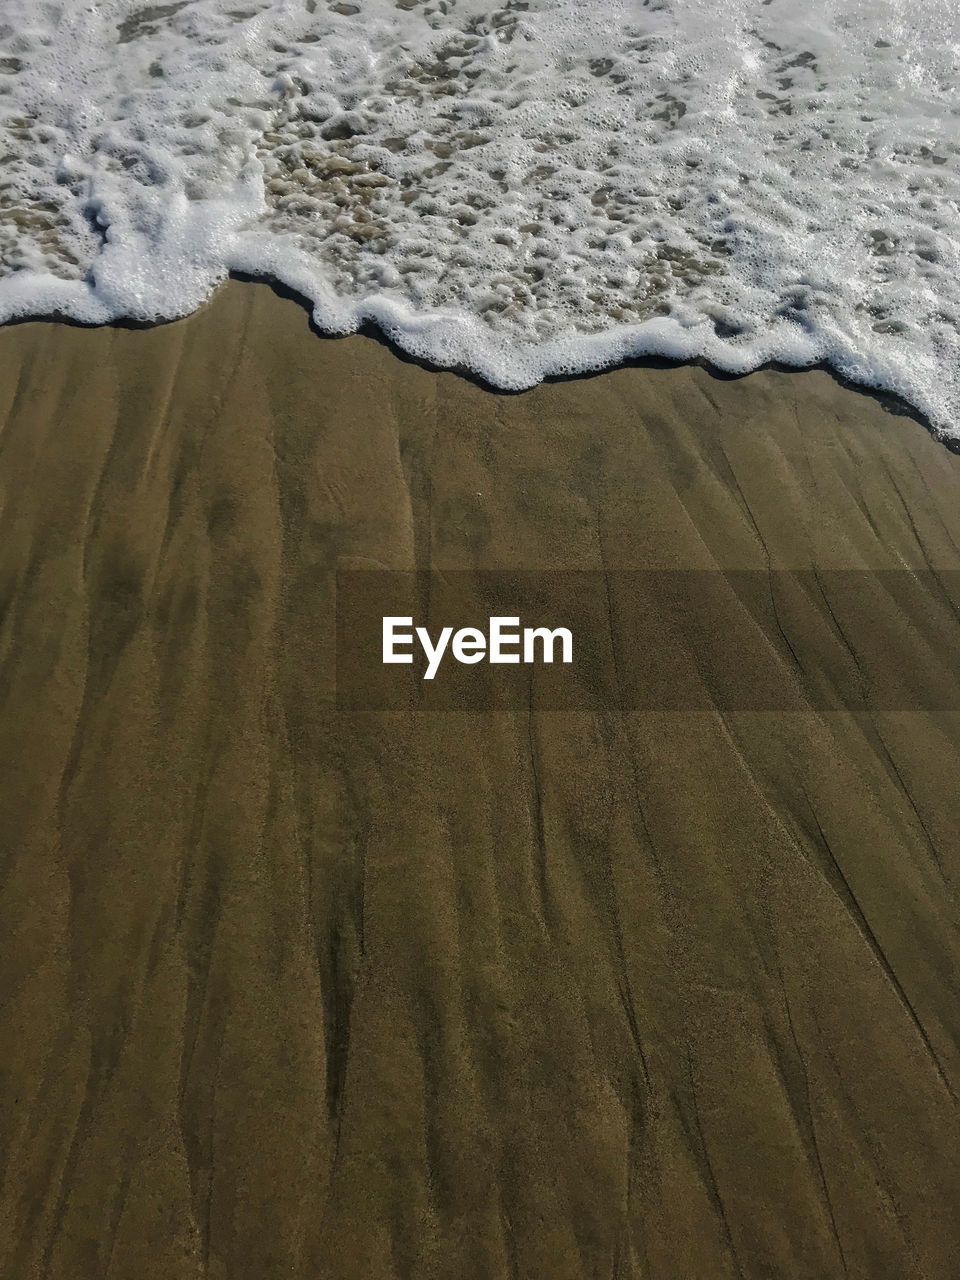 High angle view of surf reaching on shore at beach